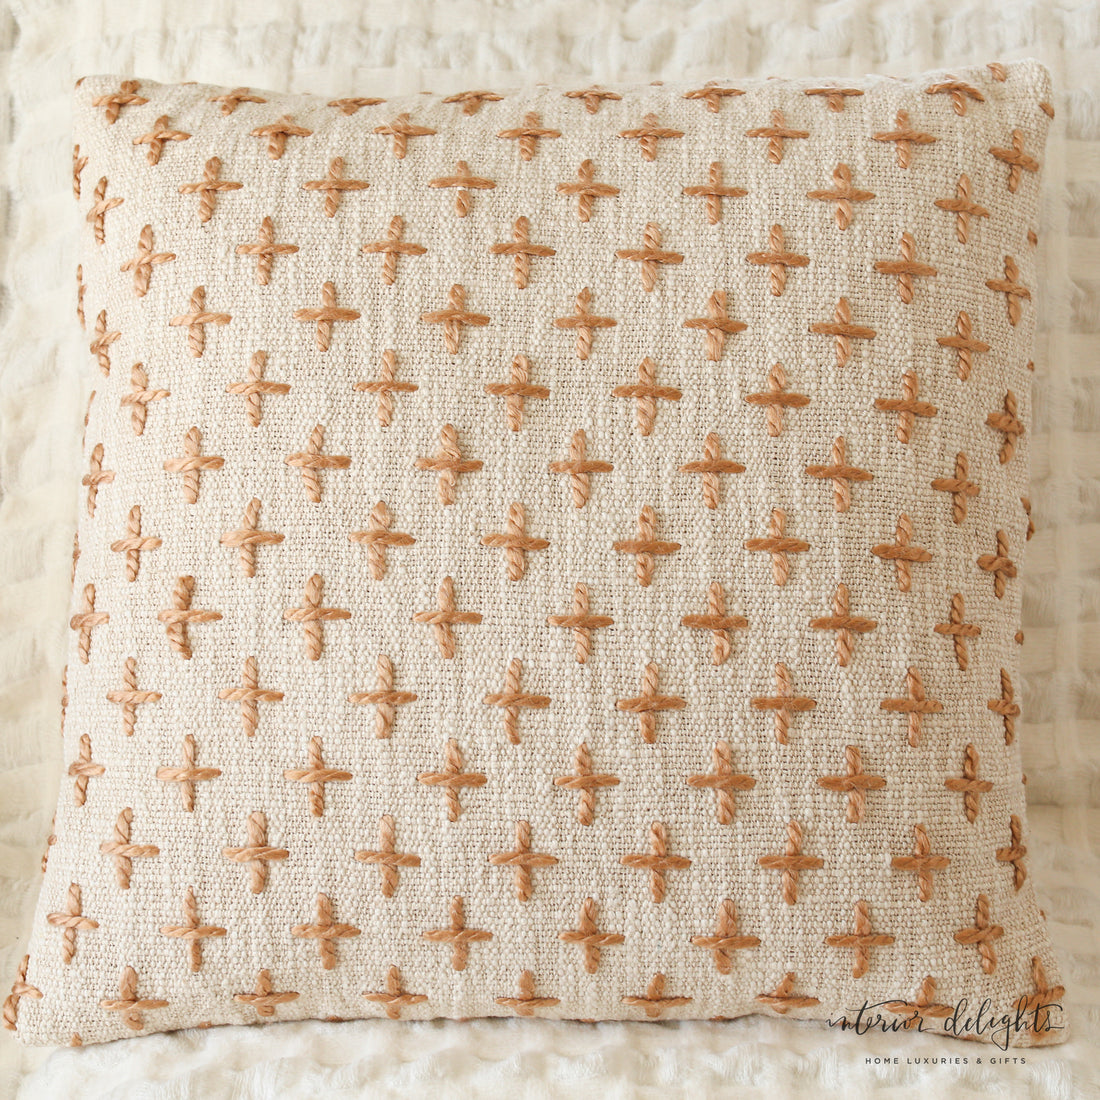 Cross Embroidered Pillows- Choose from Lumbar or Square Design